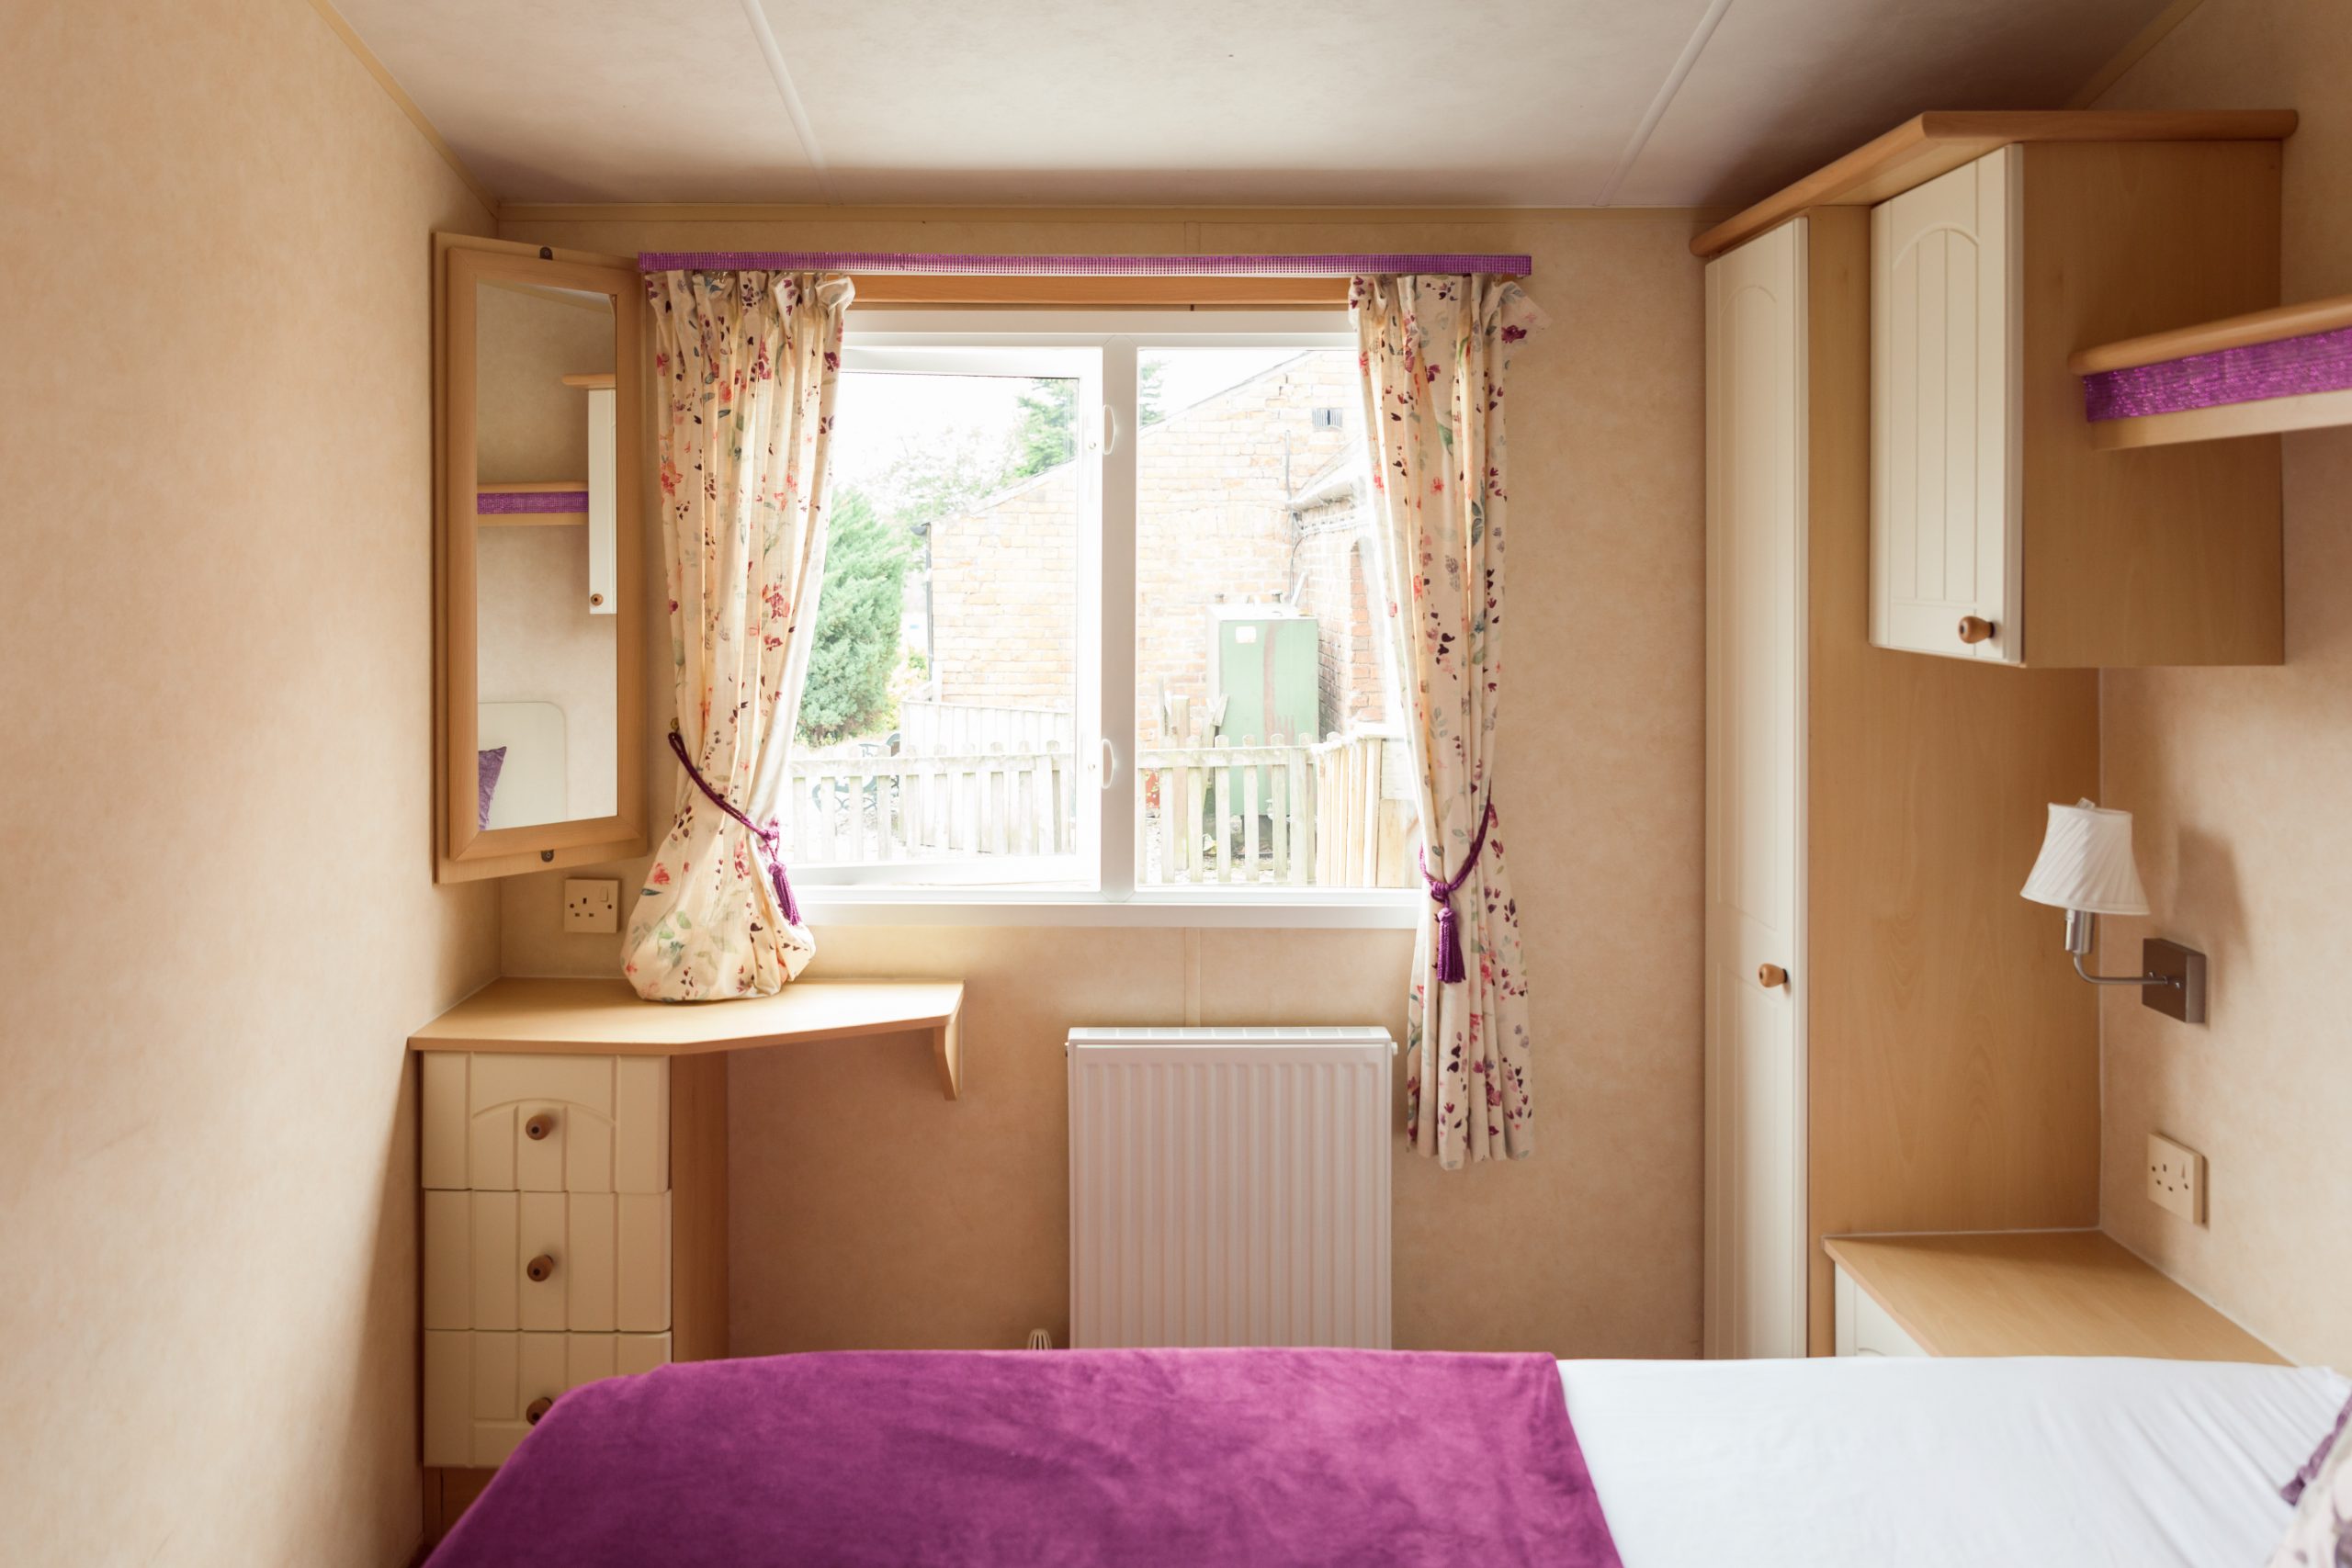 Pitch and Canvas | Glamping and Camping in Cheshire | Caravan windows